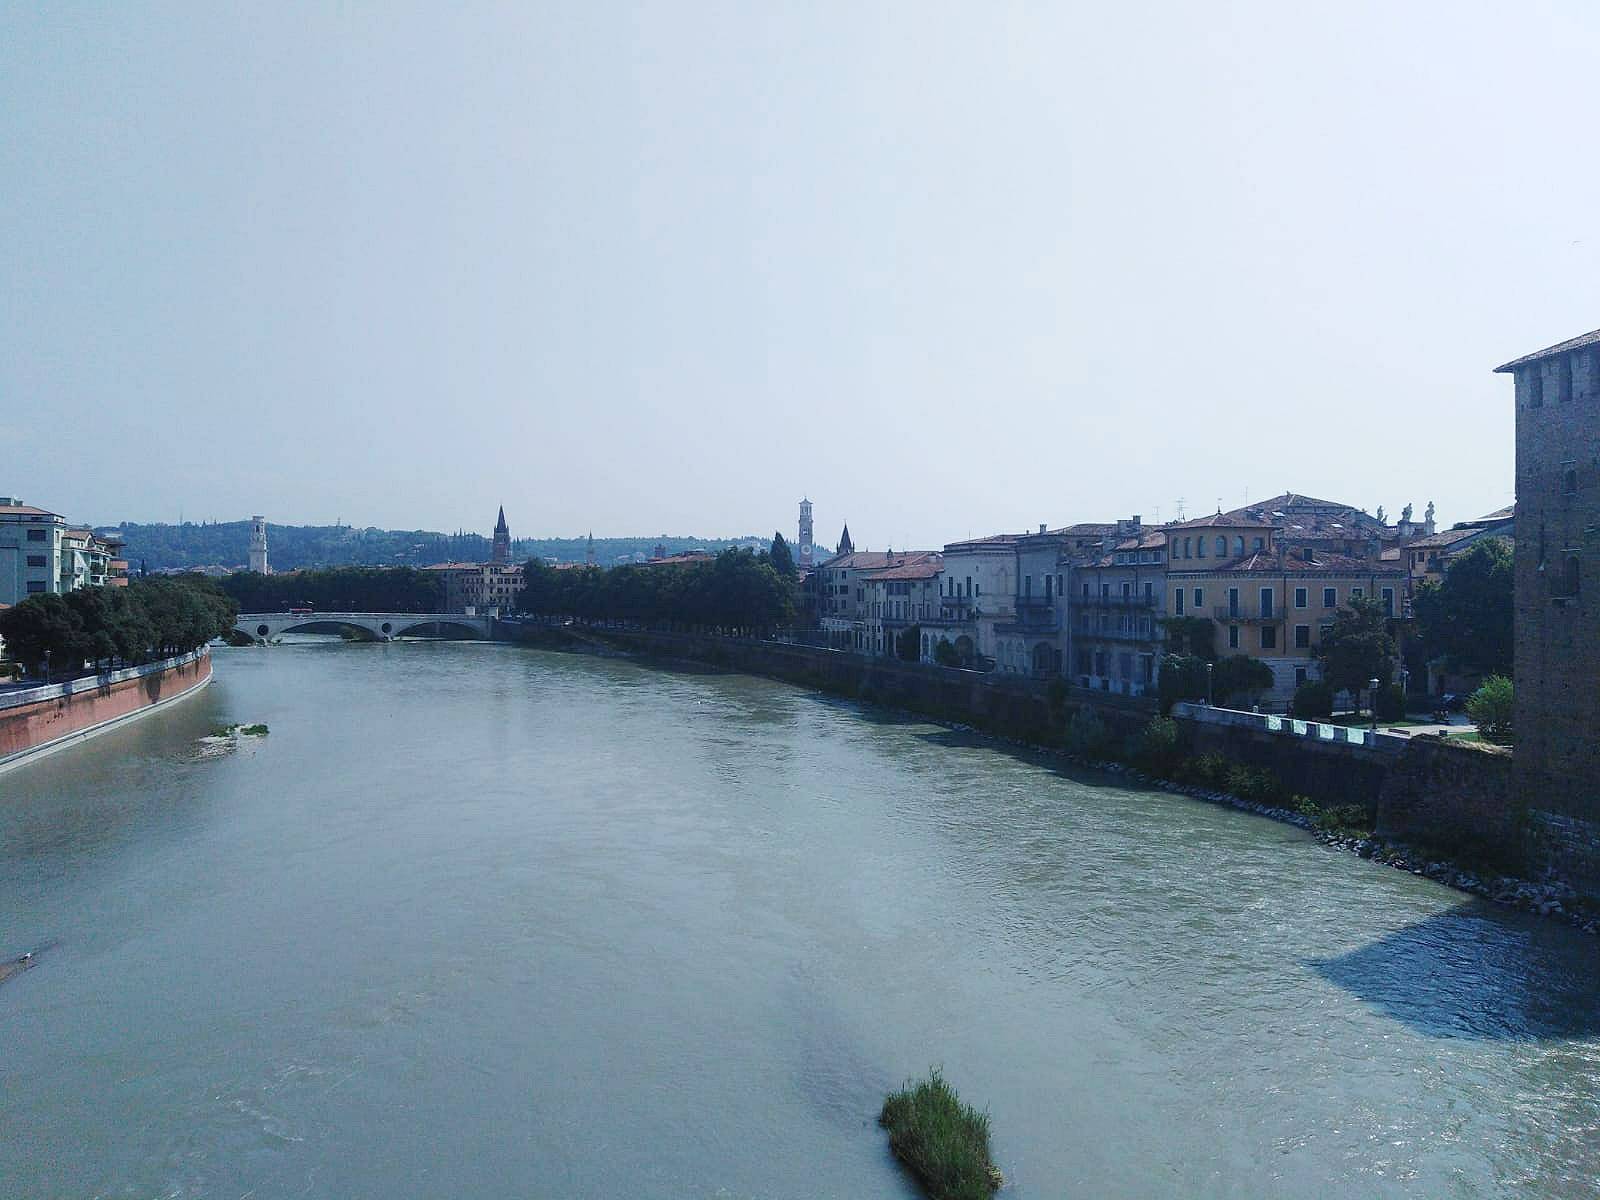 A beautiful view over numerous houses of Verona and the river Adige. Do you see the Torre dei Lomberti?